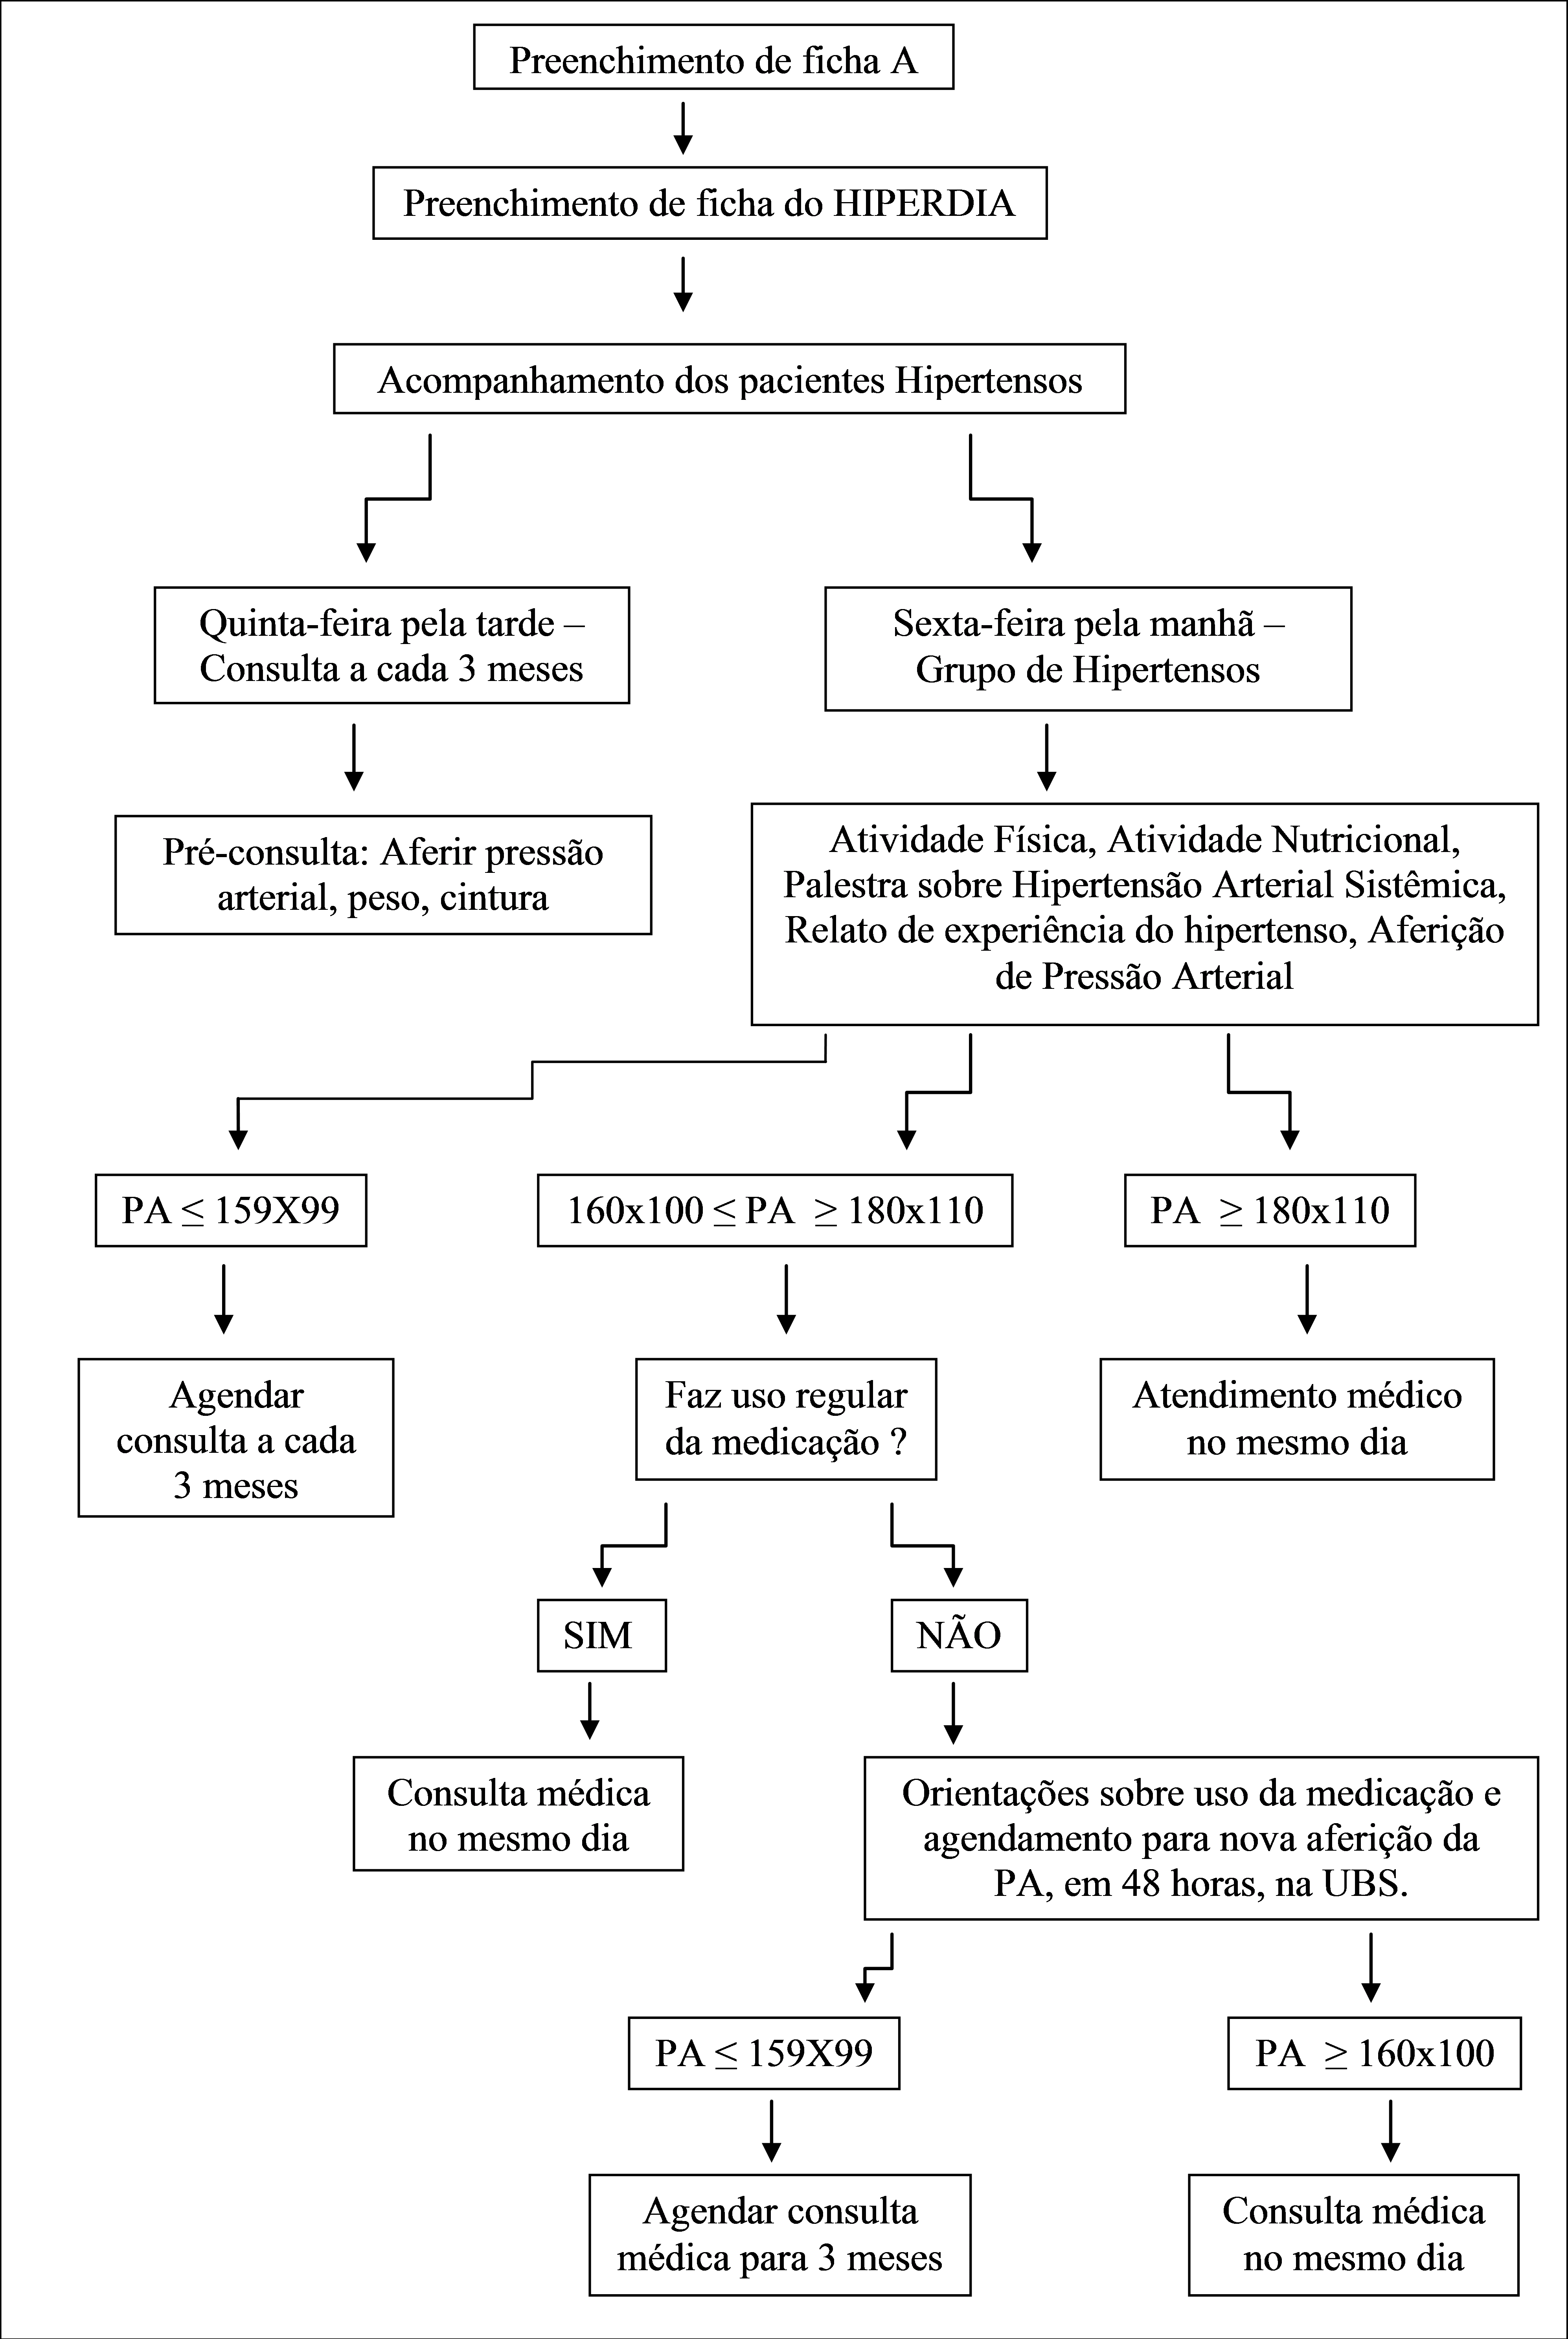 Organization chart of care of patients